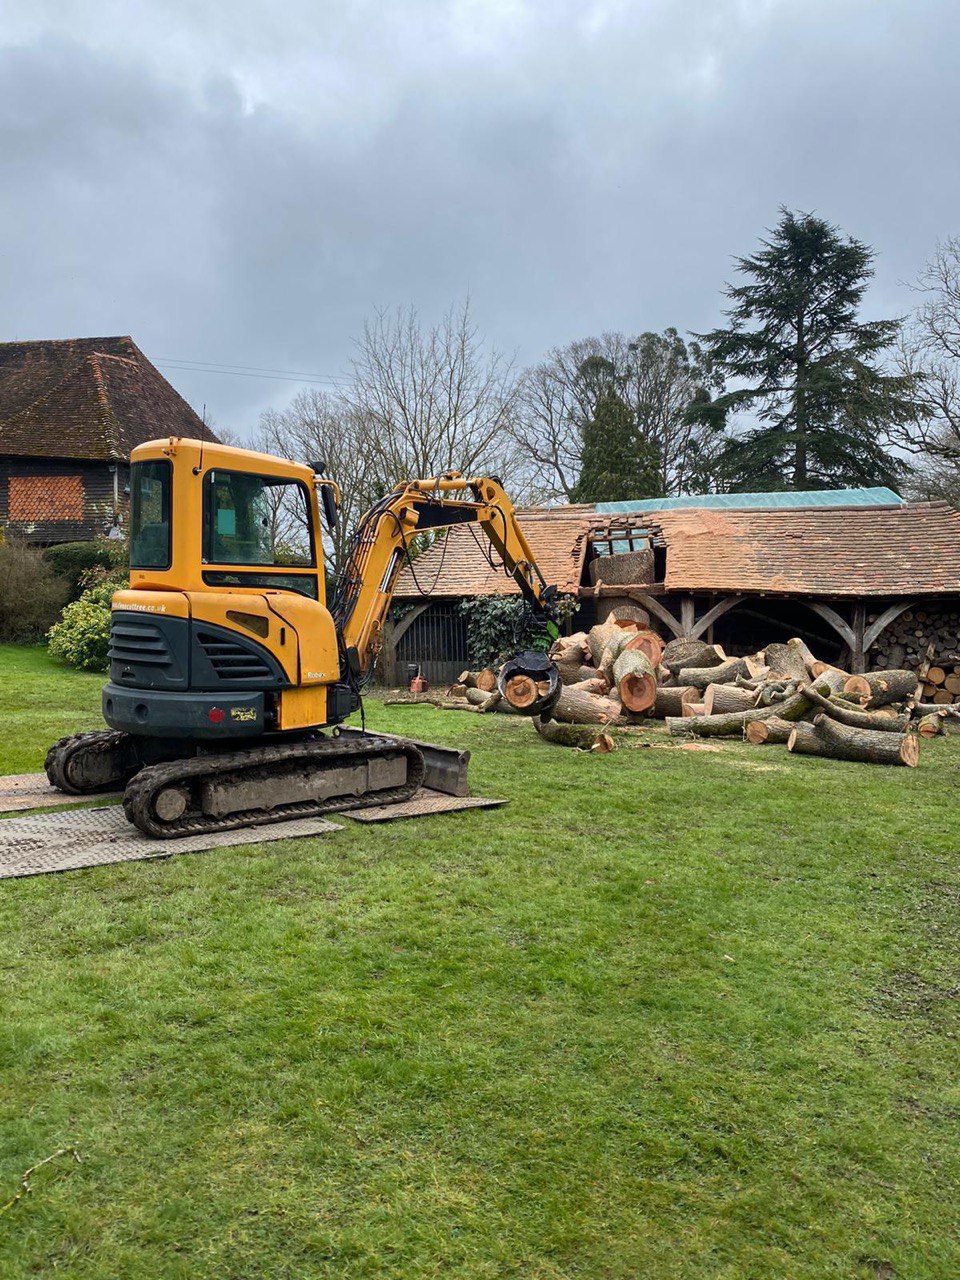 This is a photo of tree felling being carried out in Faversham. All works are being undertaken by Faversham Tree Surgeons